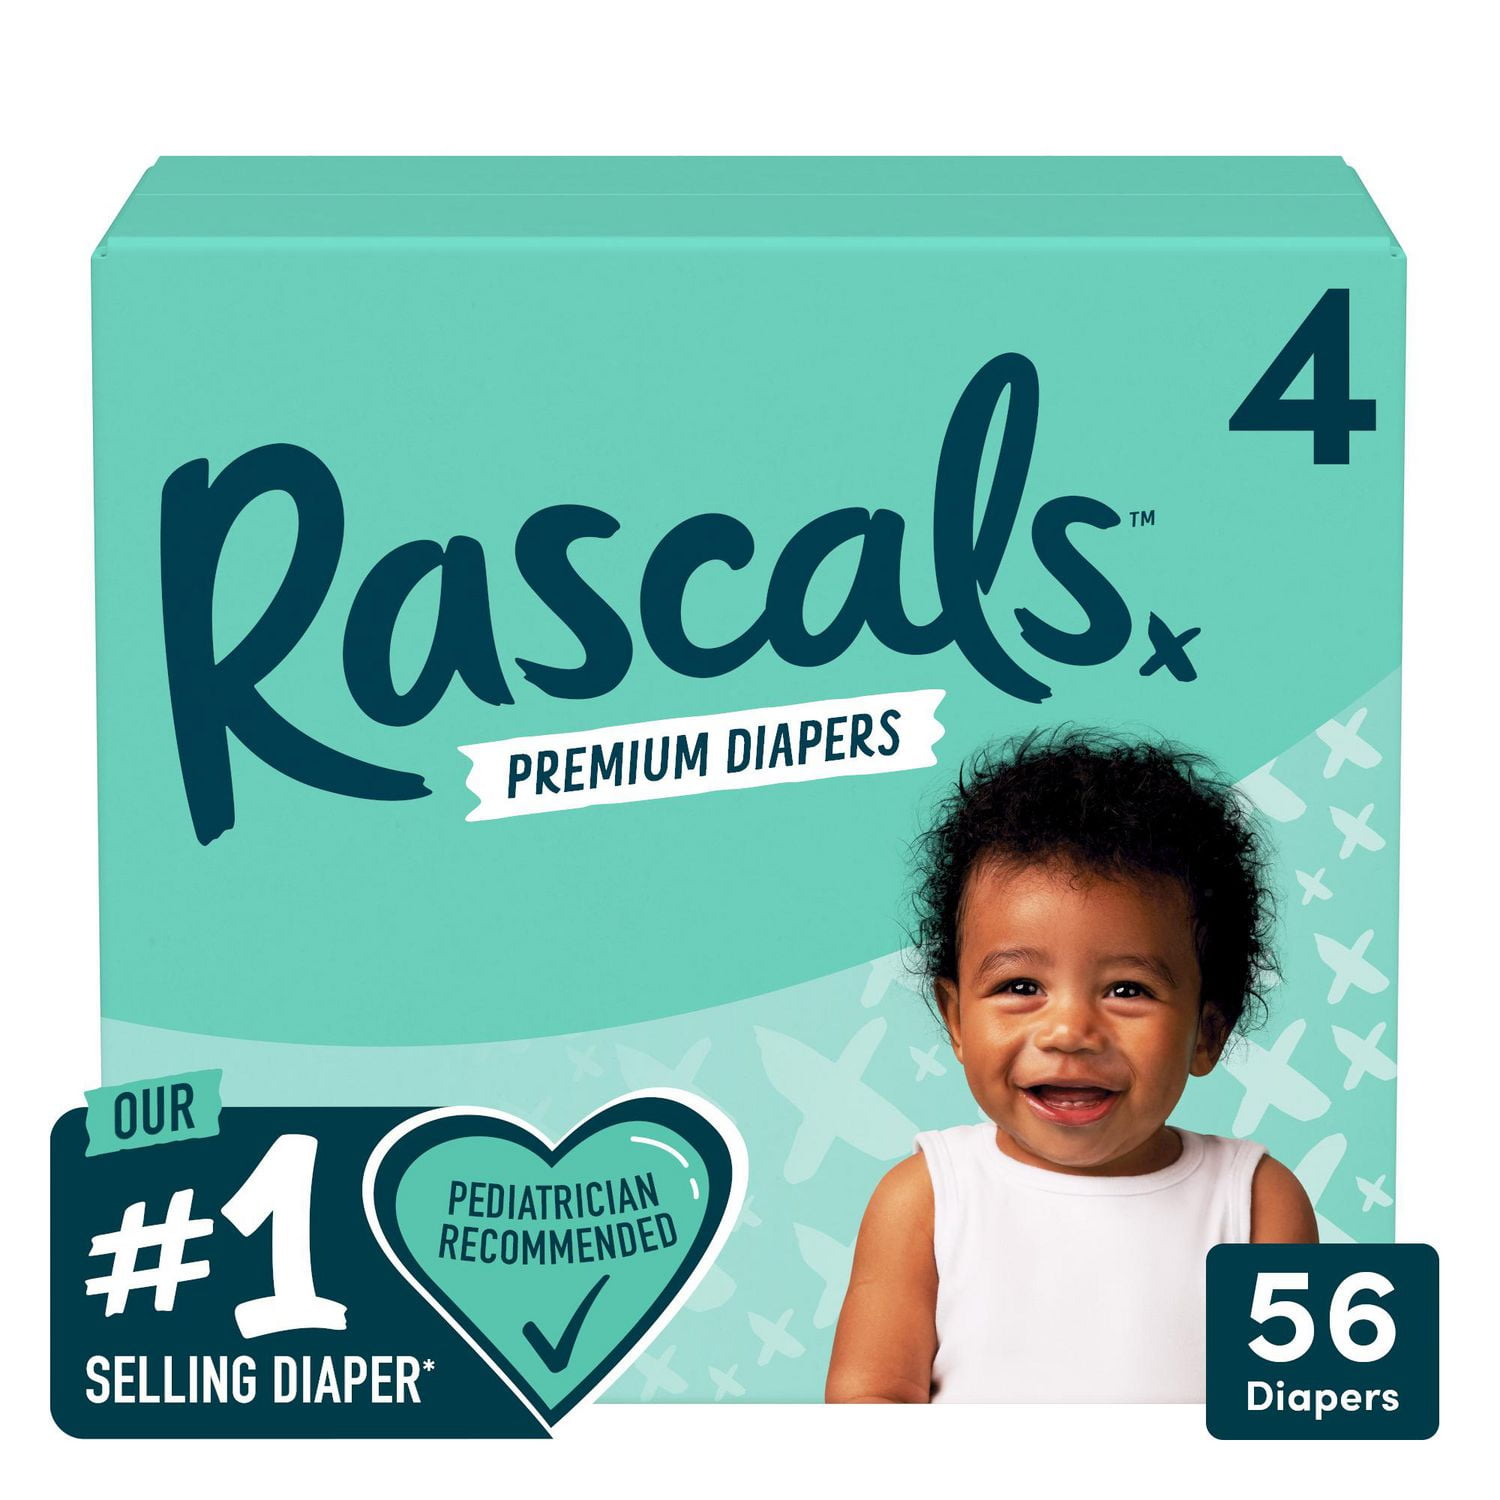 Rascal and Friends Diaper Review. Will I use these diapers for